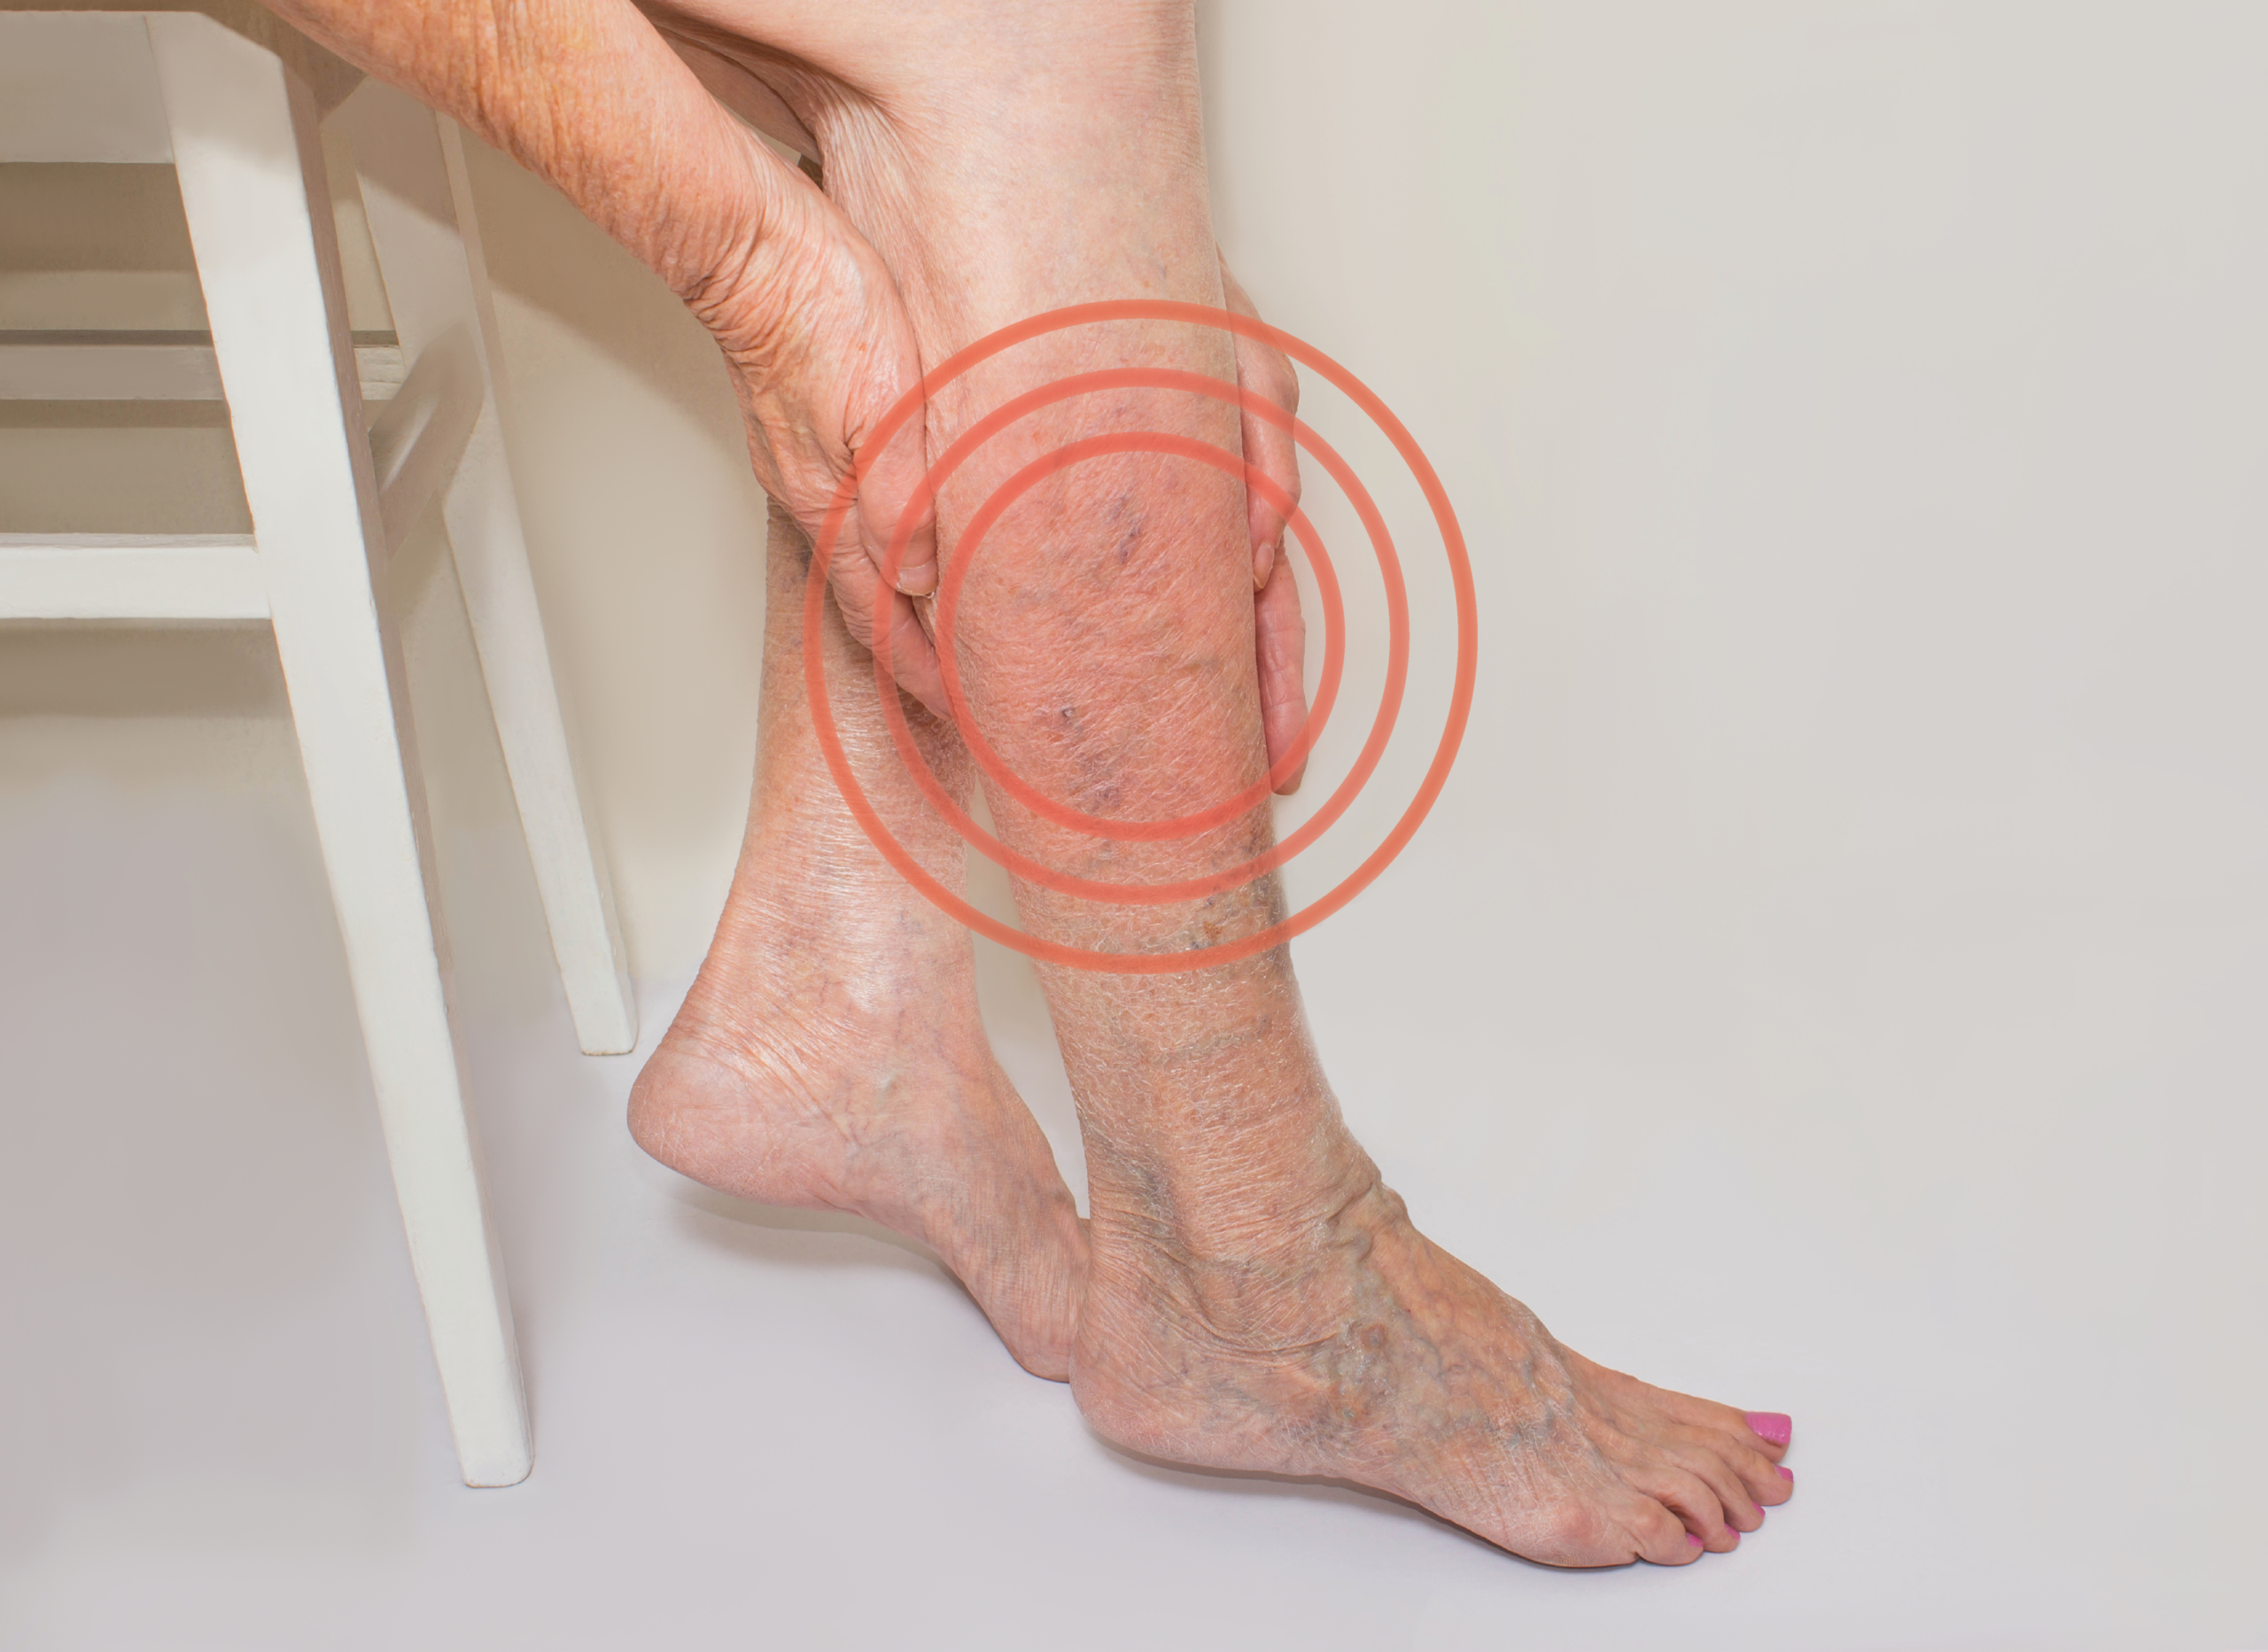 when to see a doctor for varicose veins